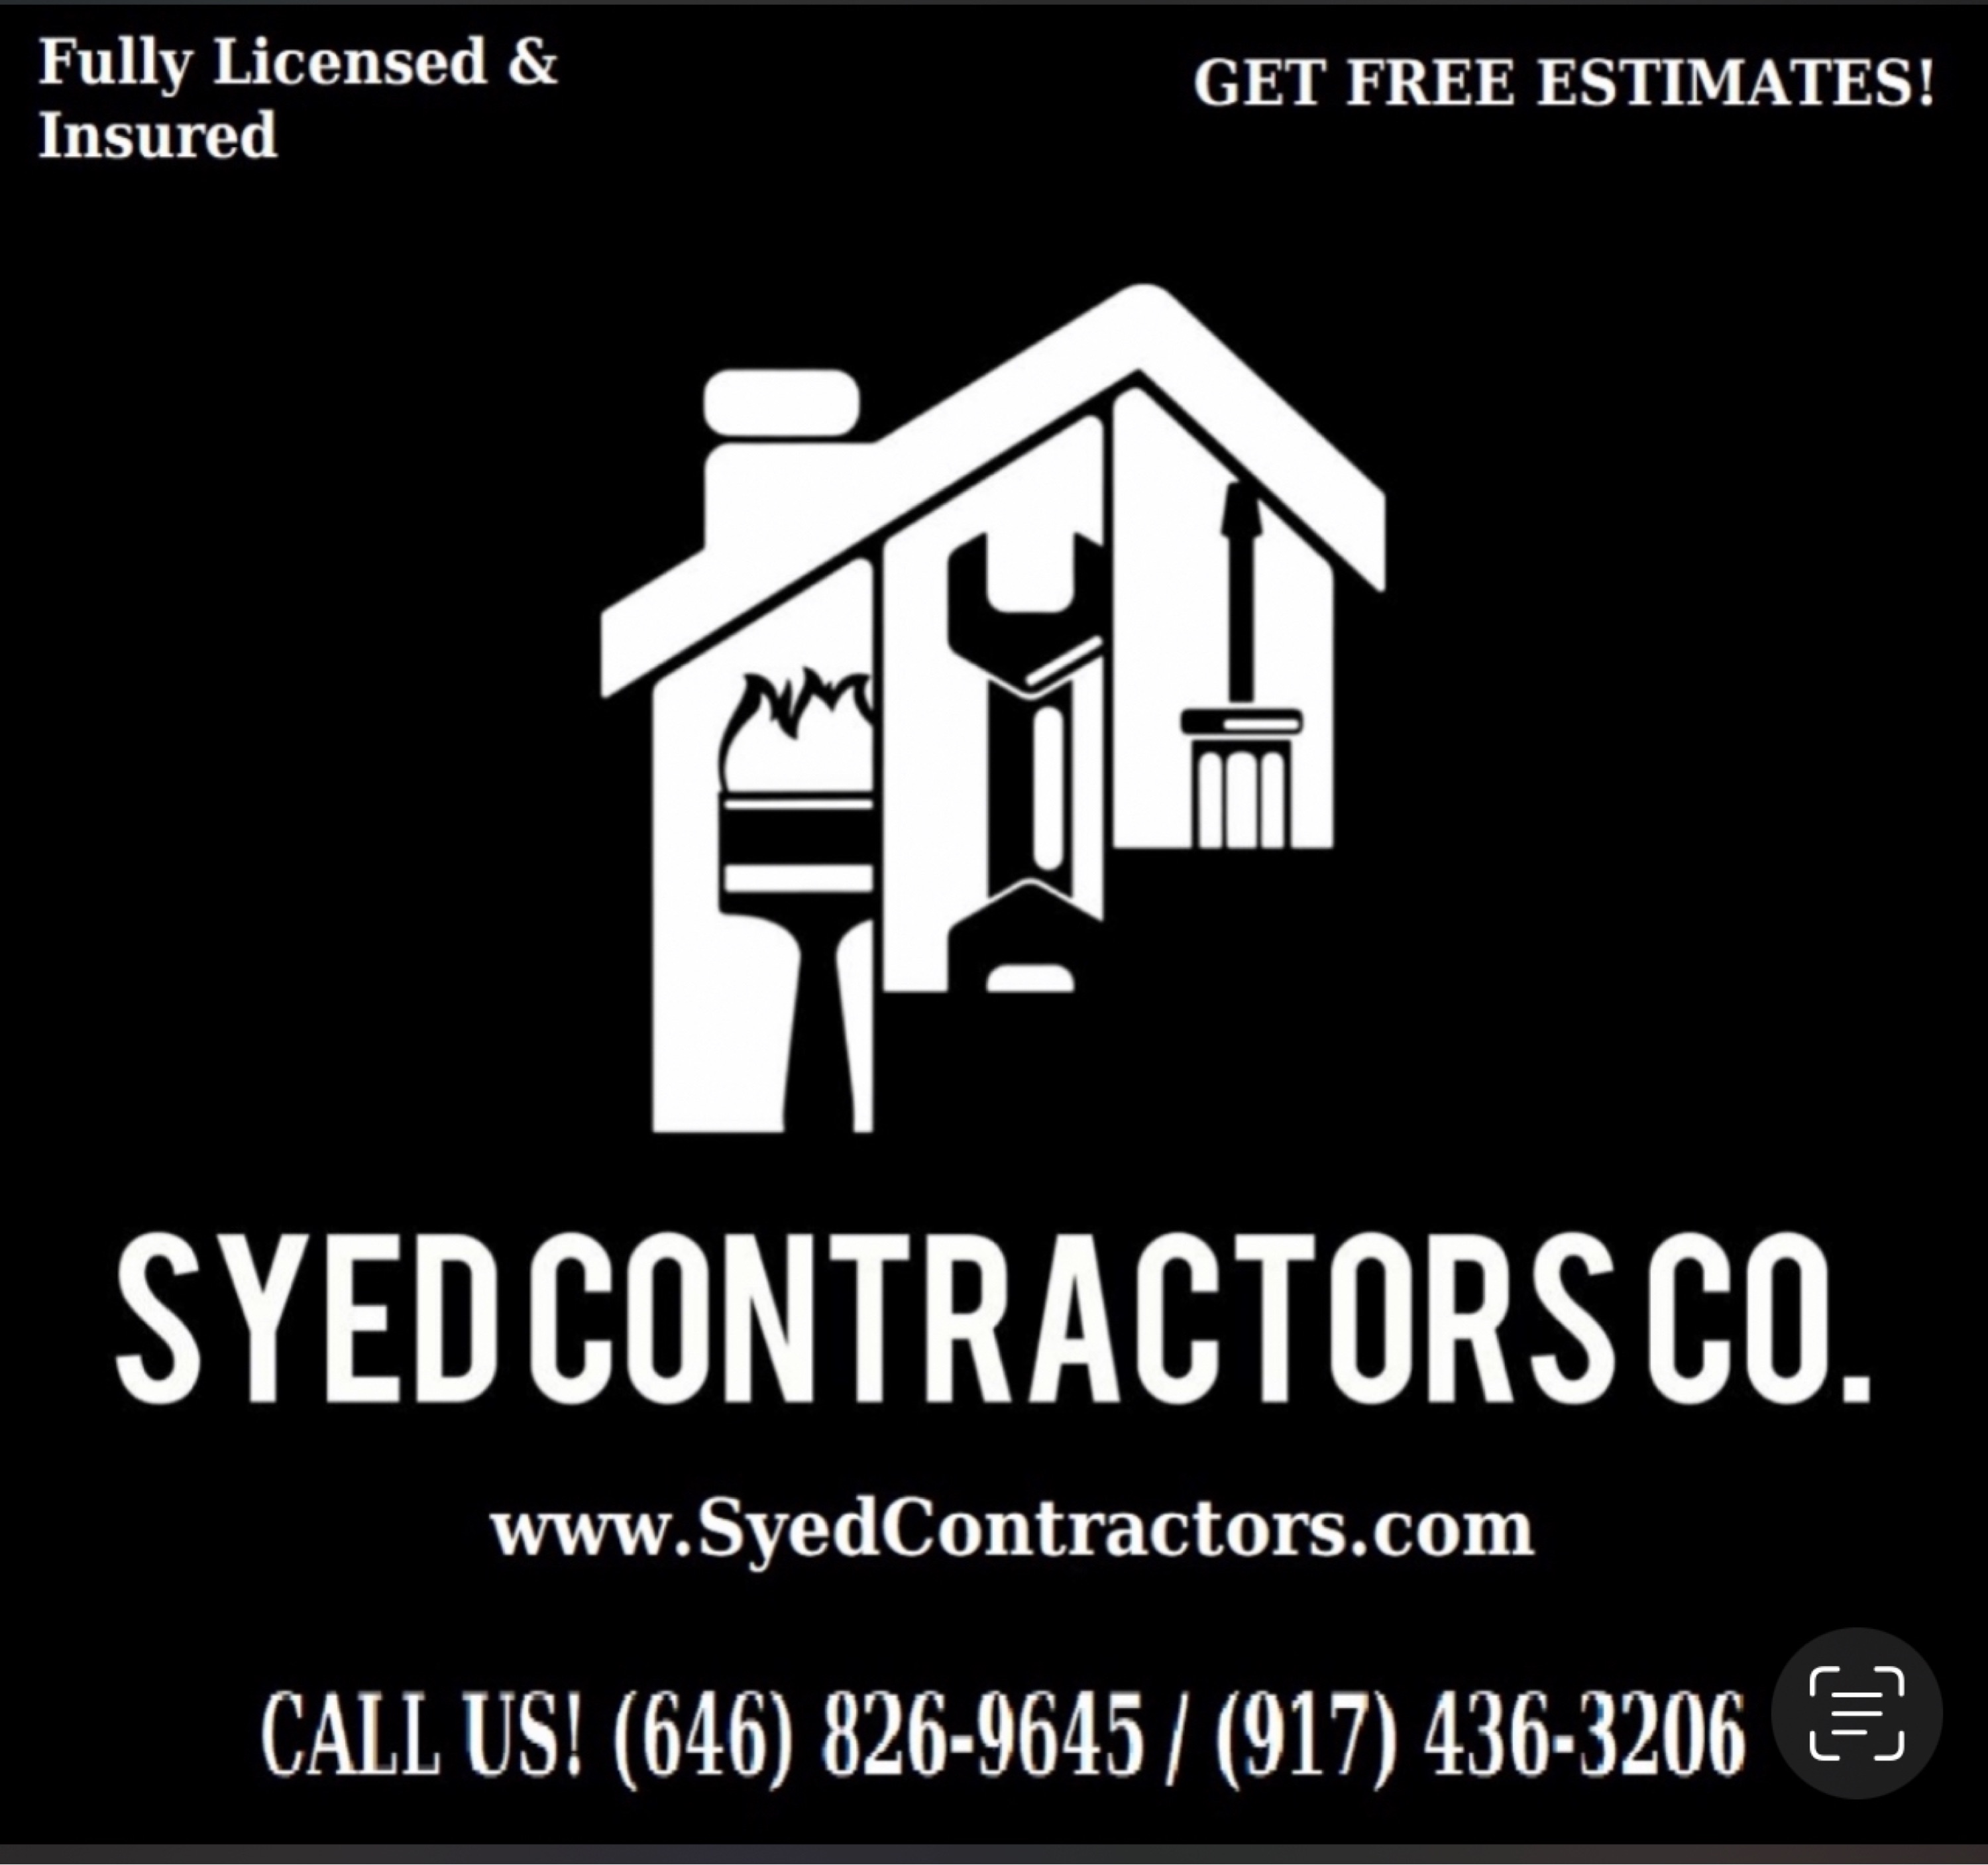 Syed Contractors Corporation Logo